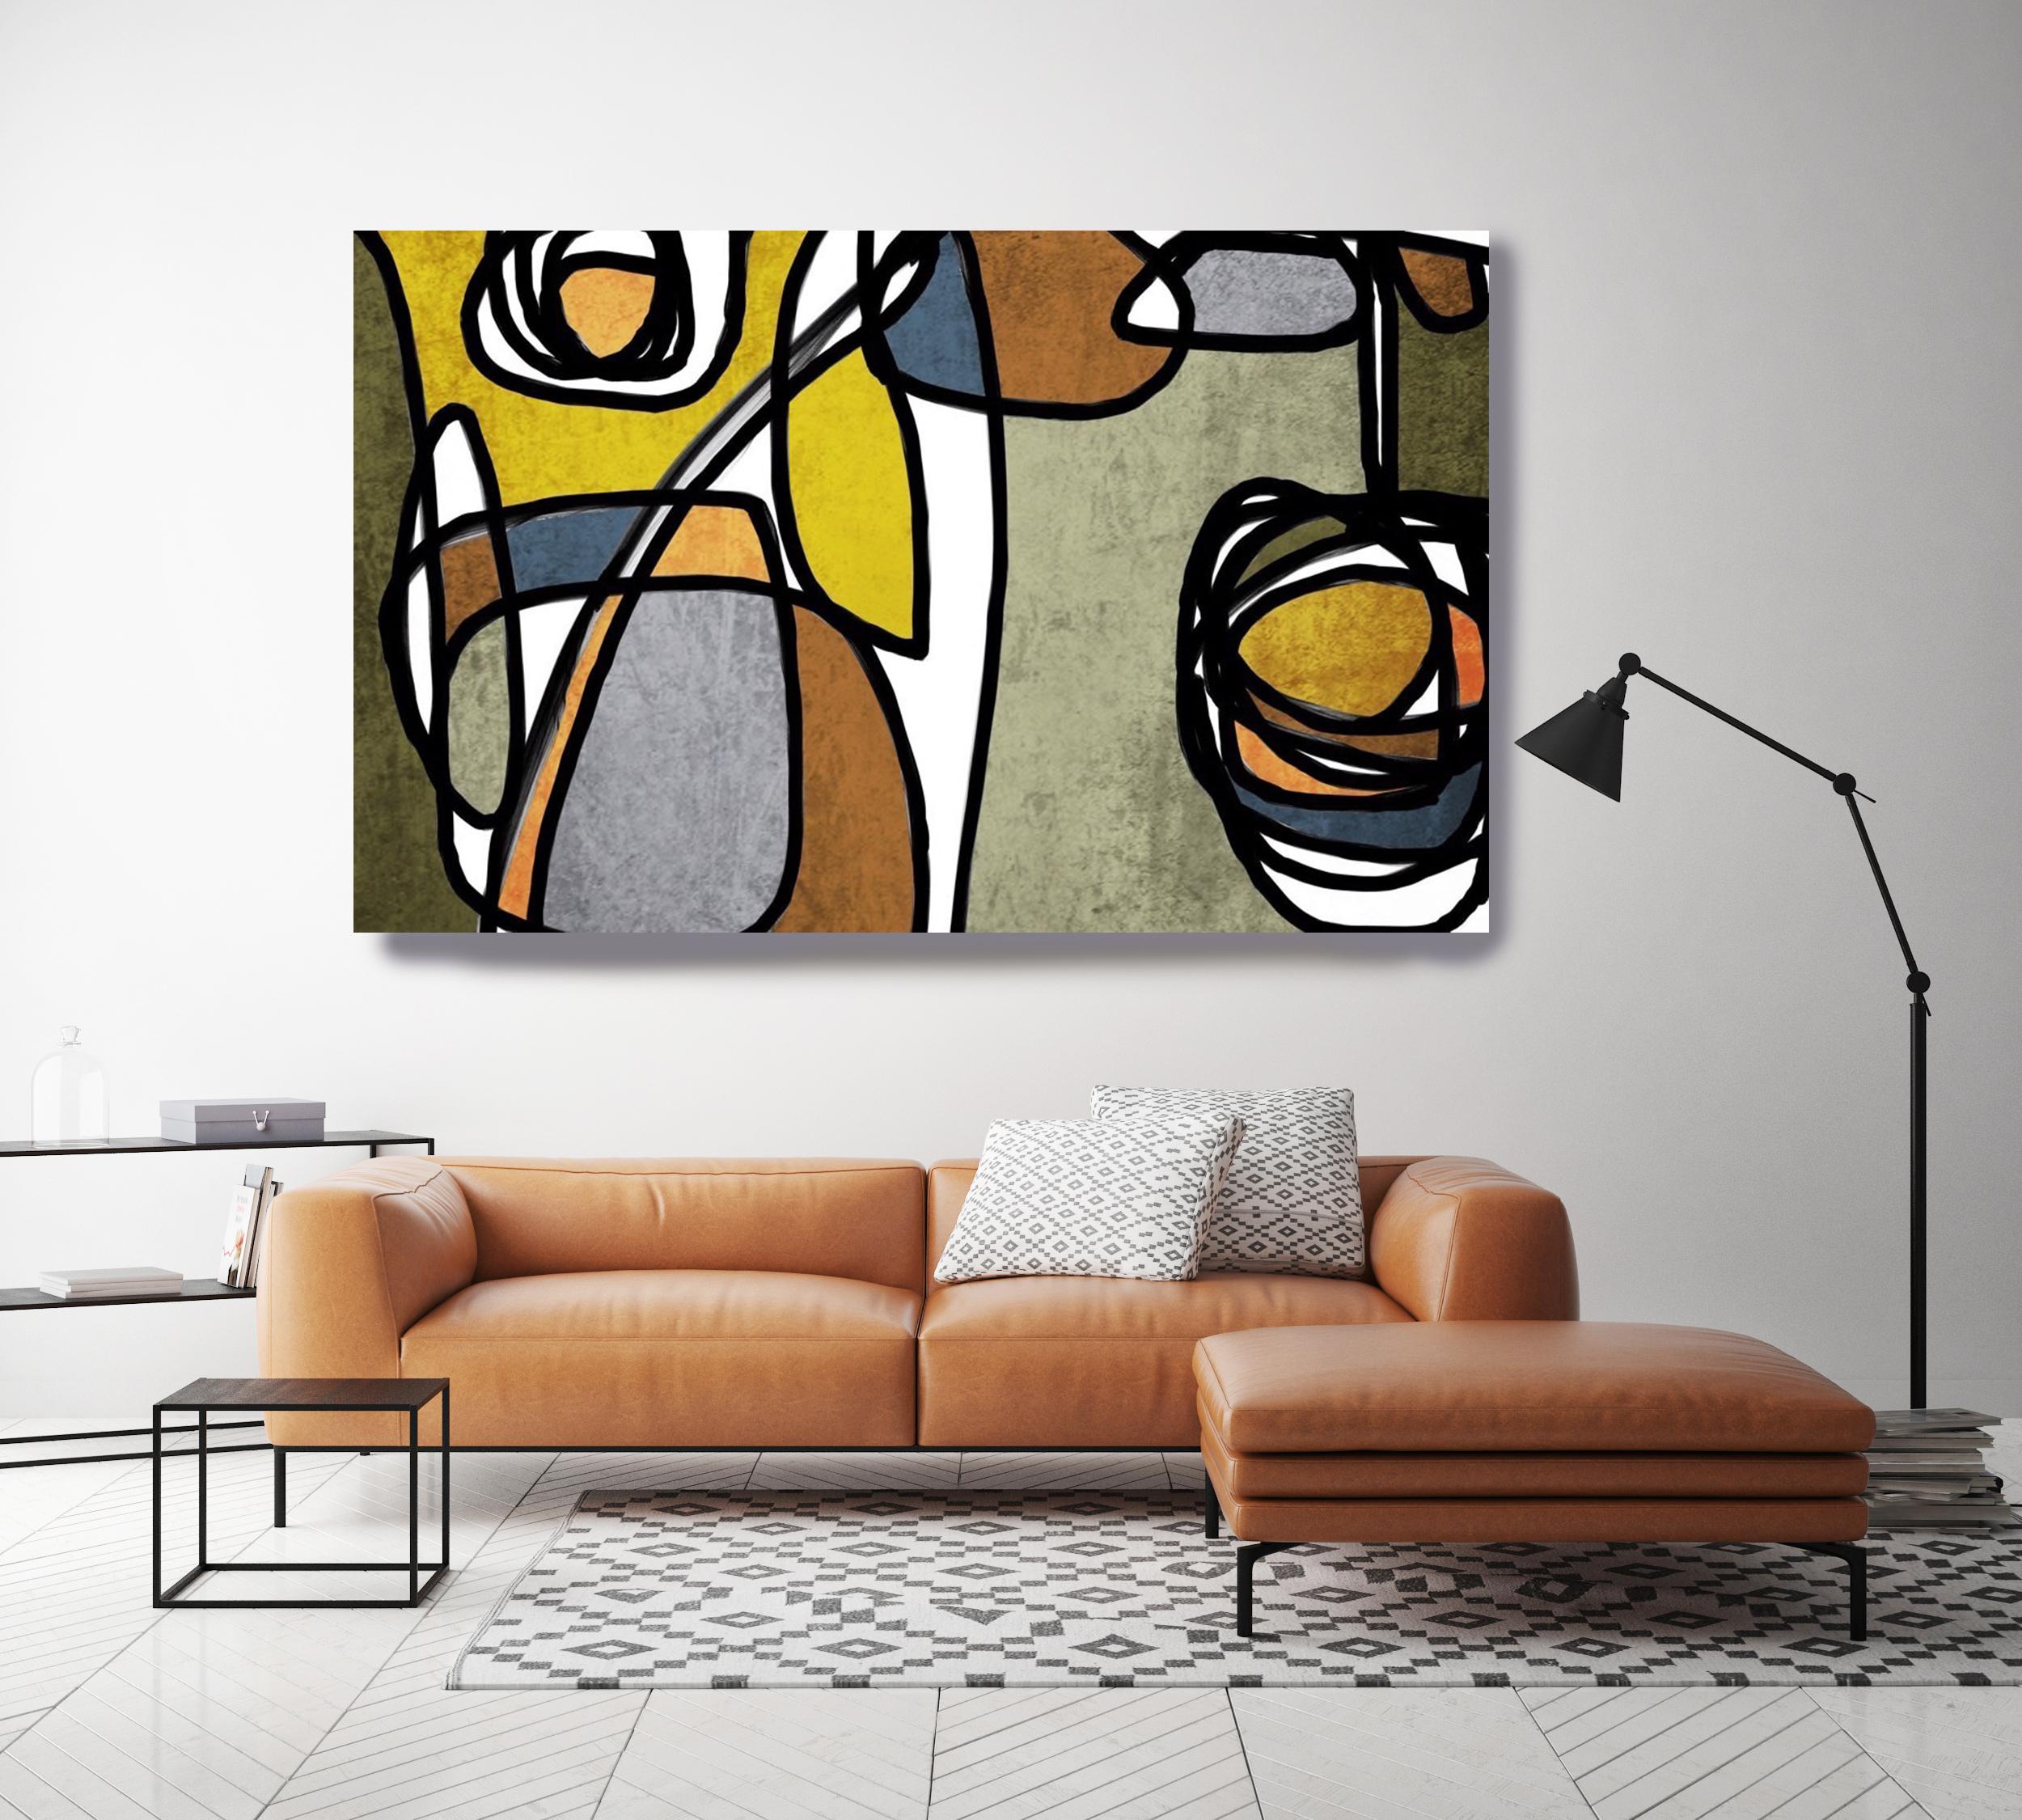 Vibrant Colorful Abstract-0-60,' a masterpiece of Mid Century Modern Art by the renowned artist Irena Orlov.

This is no ordinary artwork; it's a limited edition Giclee meticulously hand embellished by the artist herself. Each stroke of the artist's